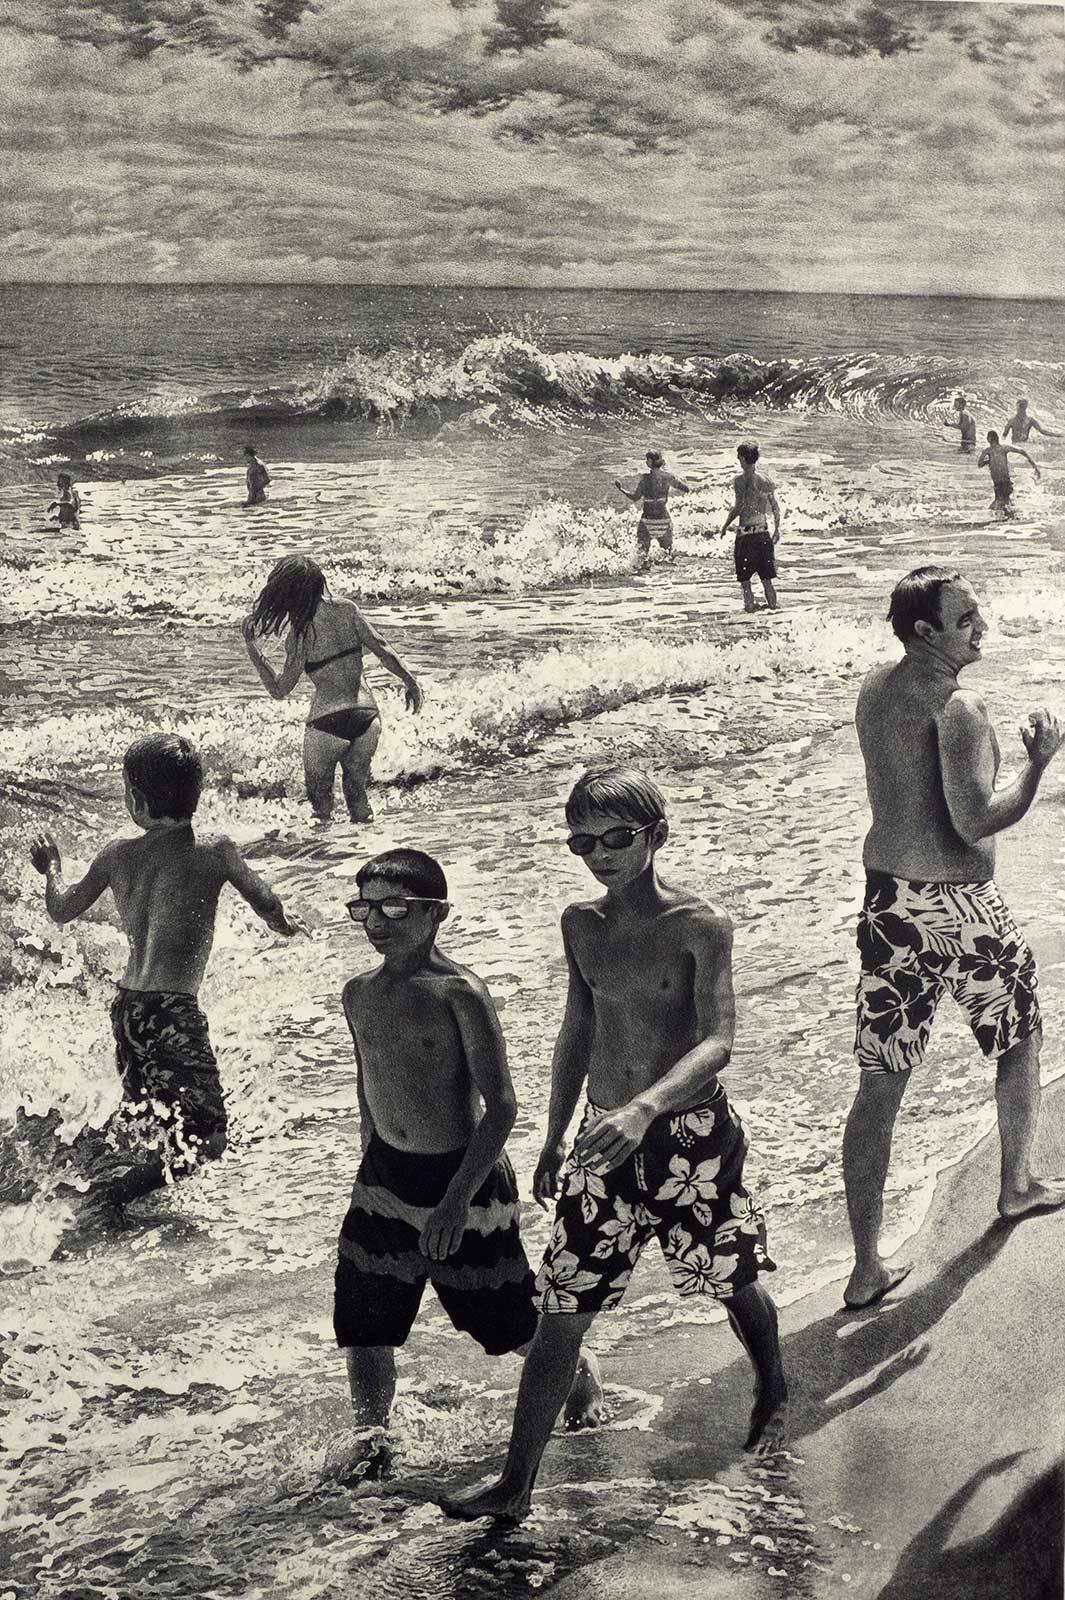 Tidal Shift # 1 (Young bathers stroll on beach with others out in surf Montauk)